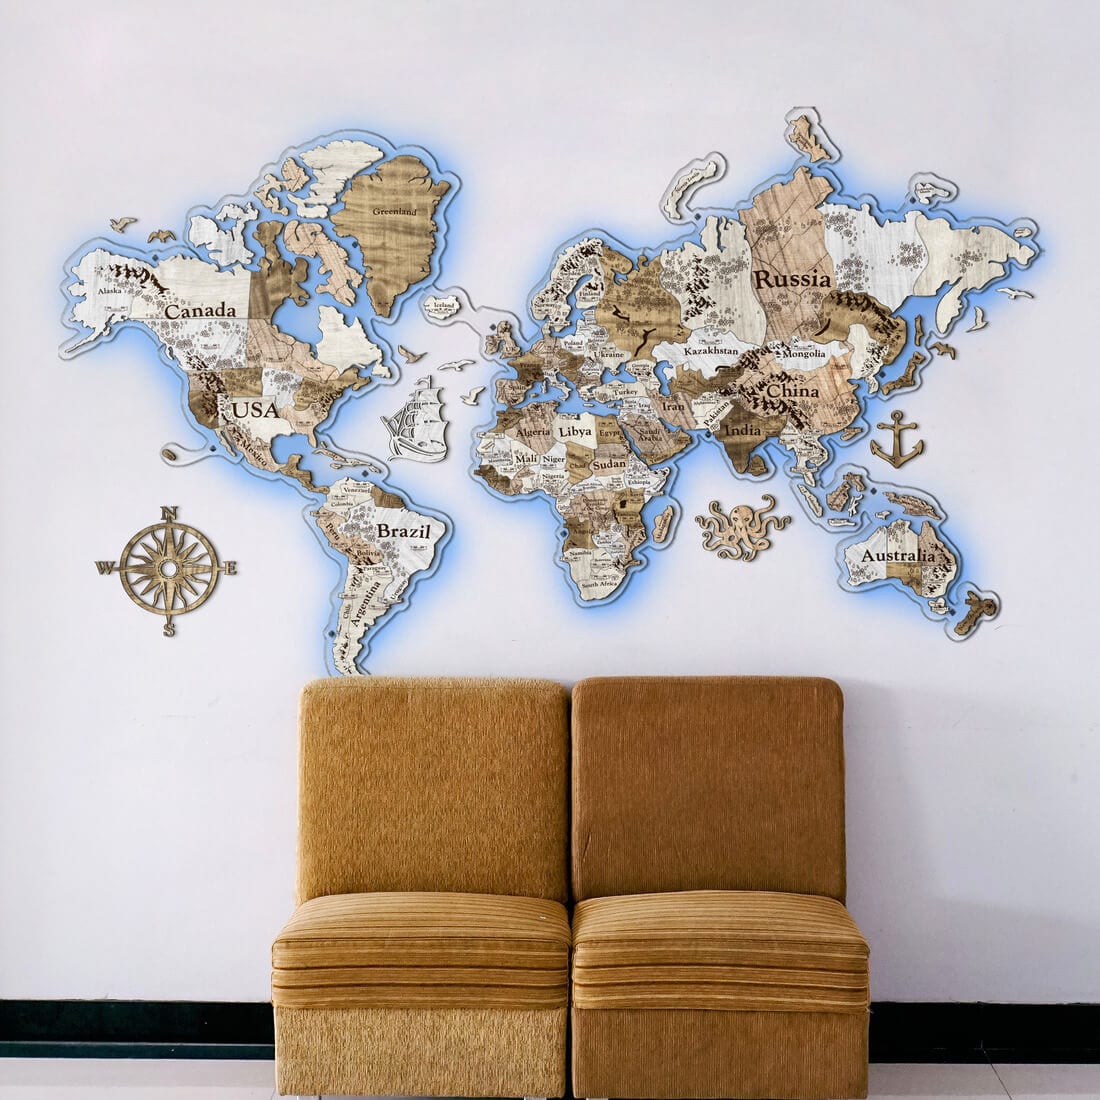 3D LED Colored Wooden World Map (Perfect World) - White Wood